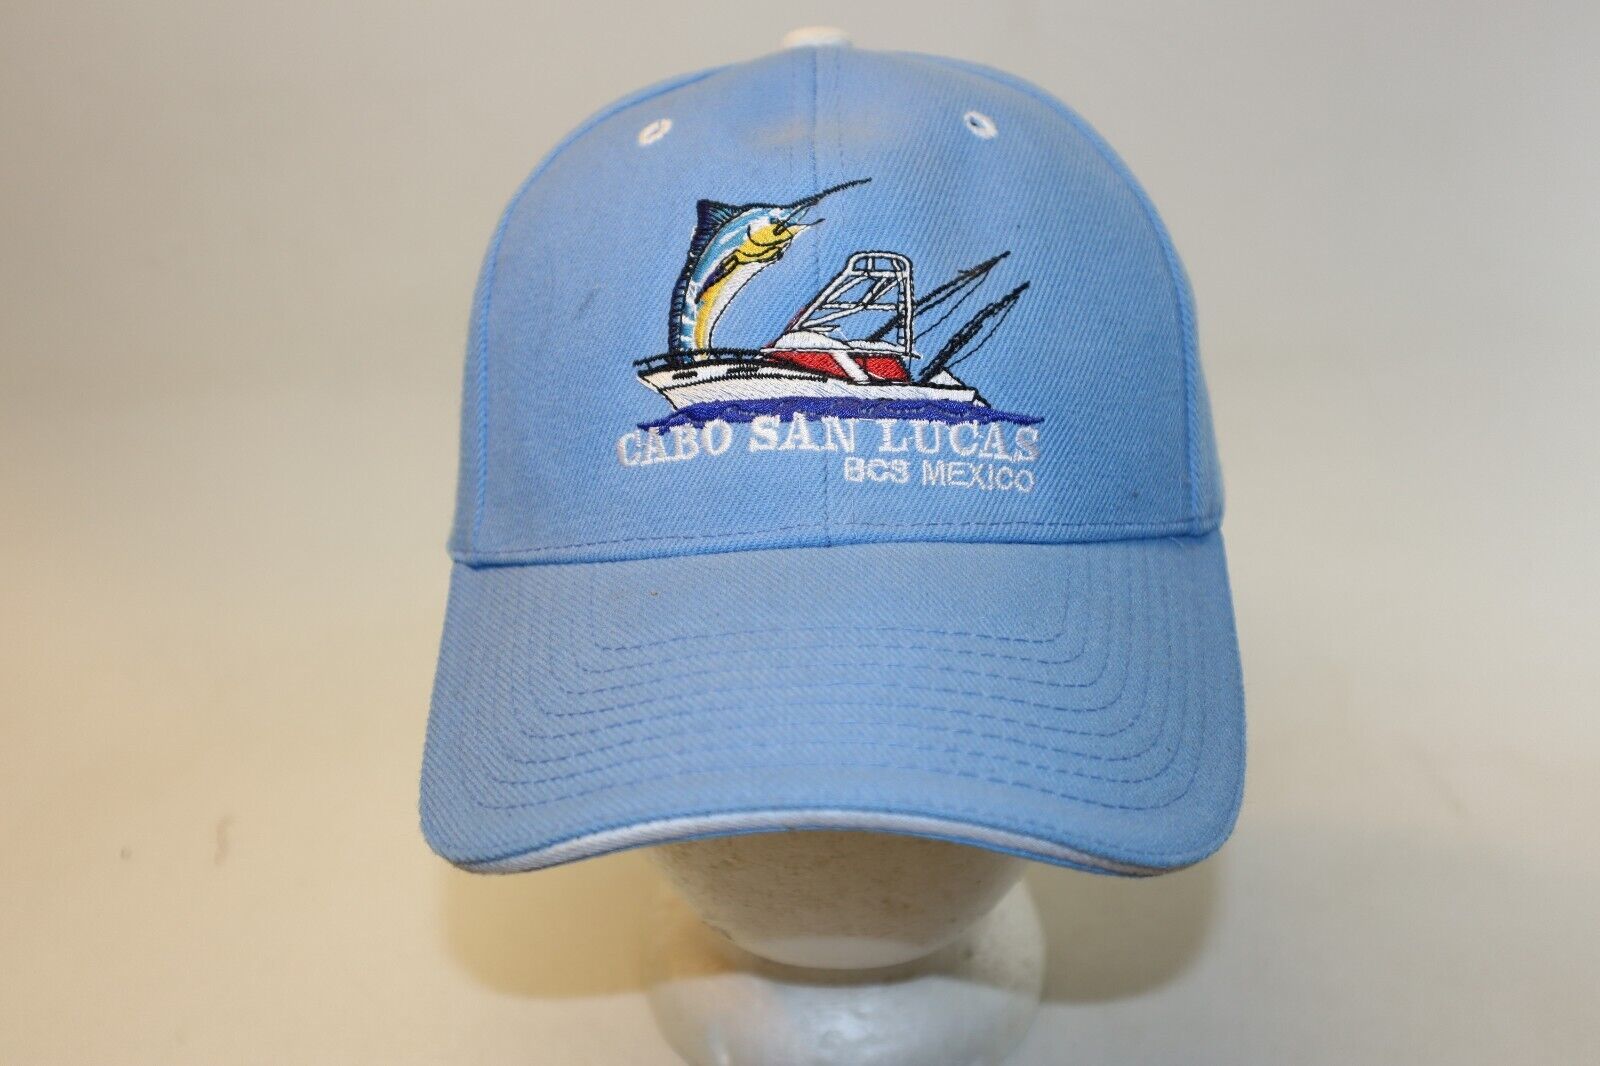 Primary image for Light Blue Teal Cabo San Lucas Hat Cap Adjustable Hook & Loop Dominican Republic